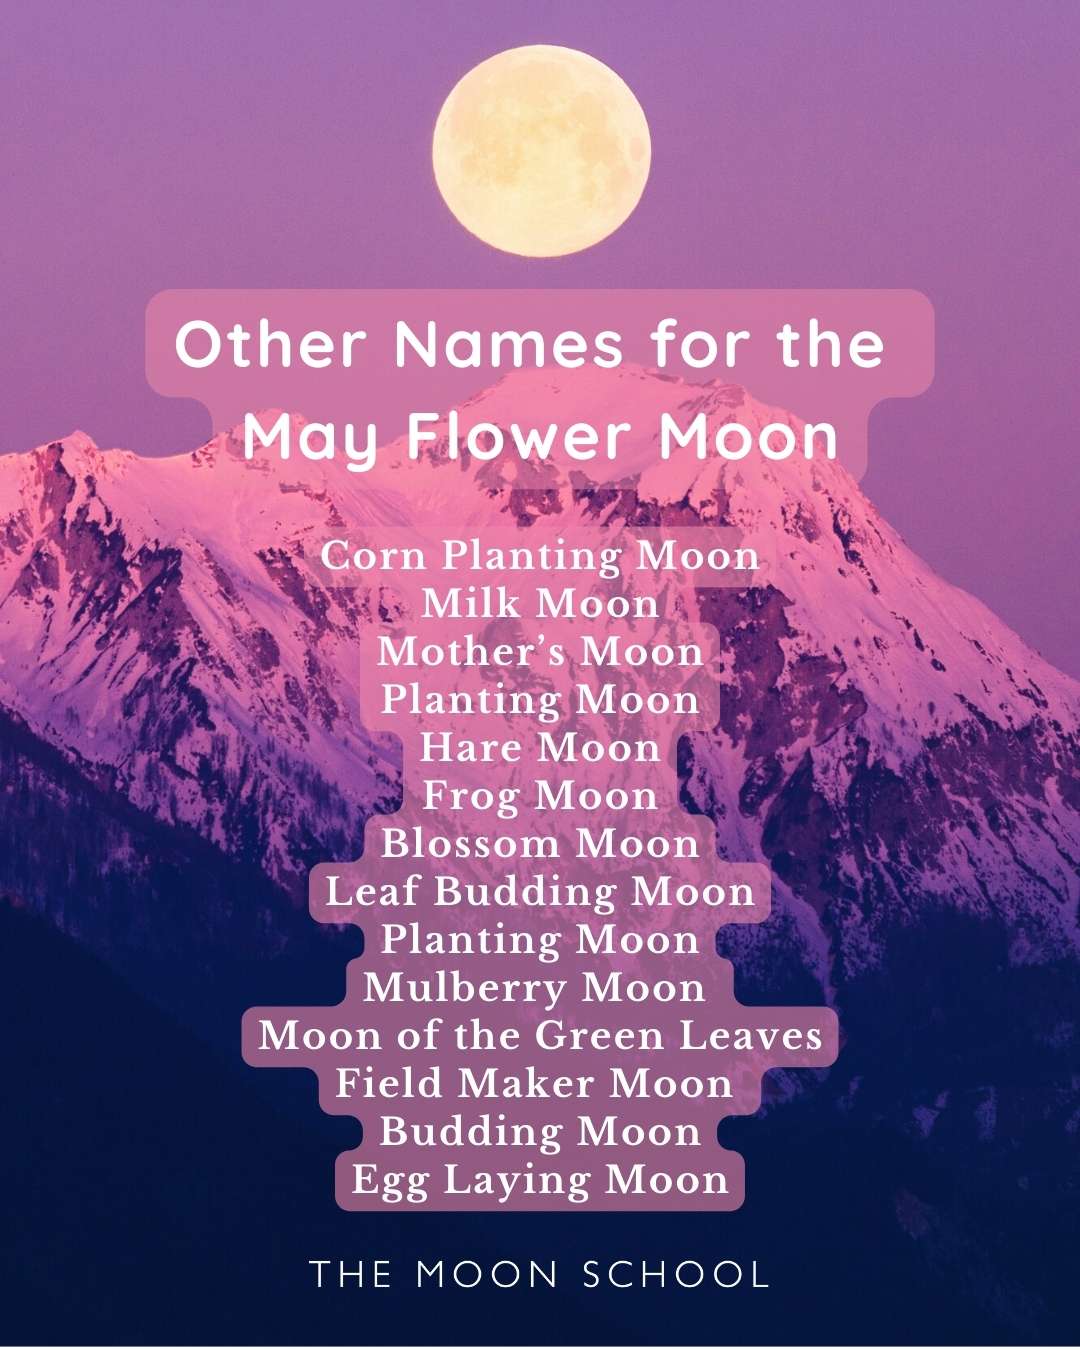 List of other full Moon names for the May full flower Moon